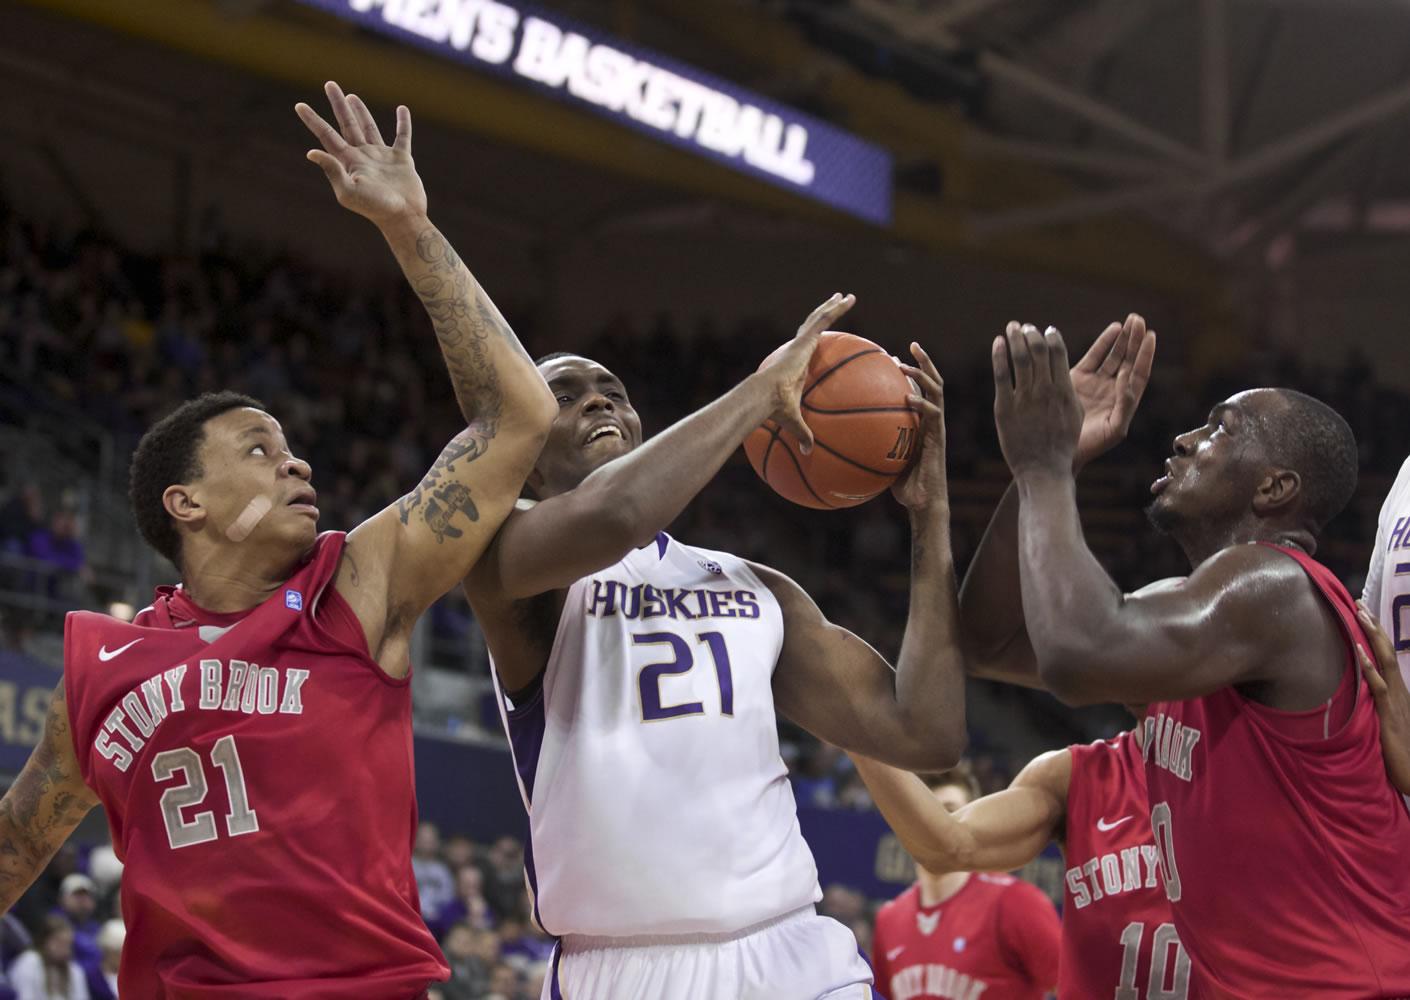 Washington's Jernard Jarreau, center, vies for a rebound with Stony Brook's Rayshaun McGrew, left, and Jameel Warney during the first half Sunday, Dec. 28, 2014, in Seattle.